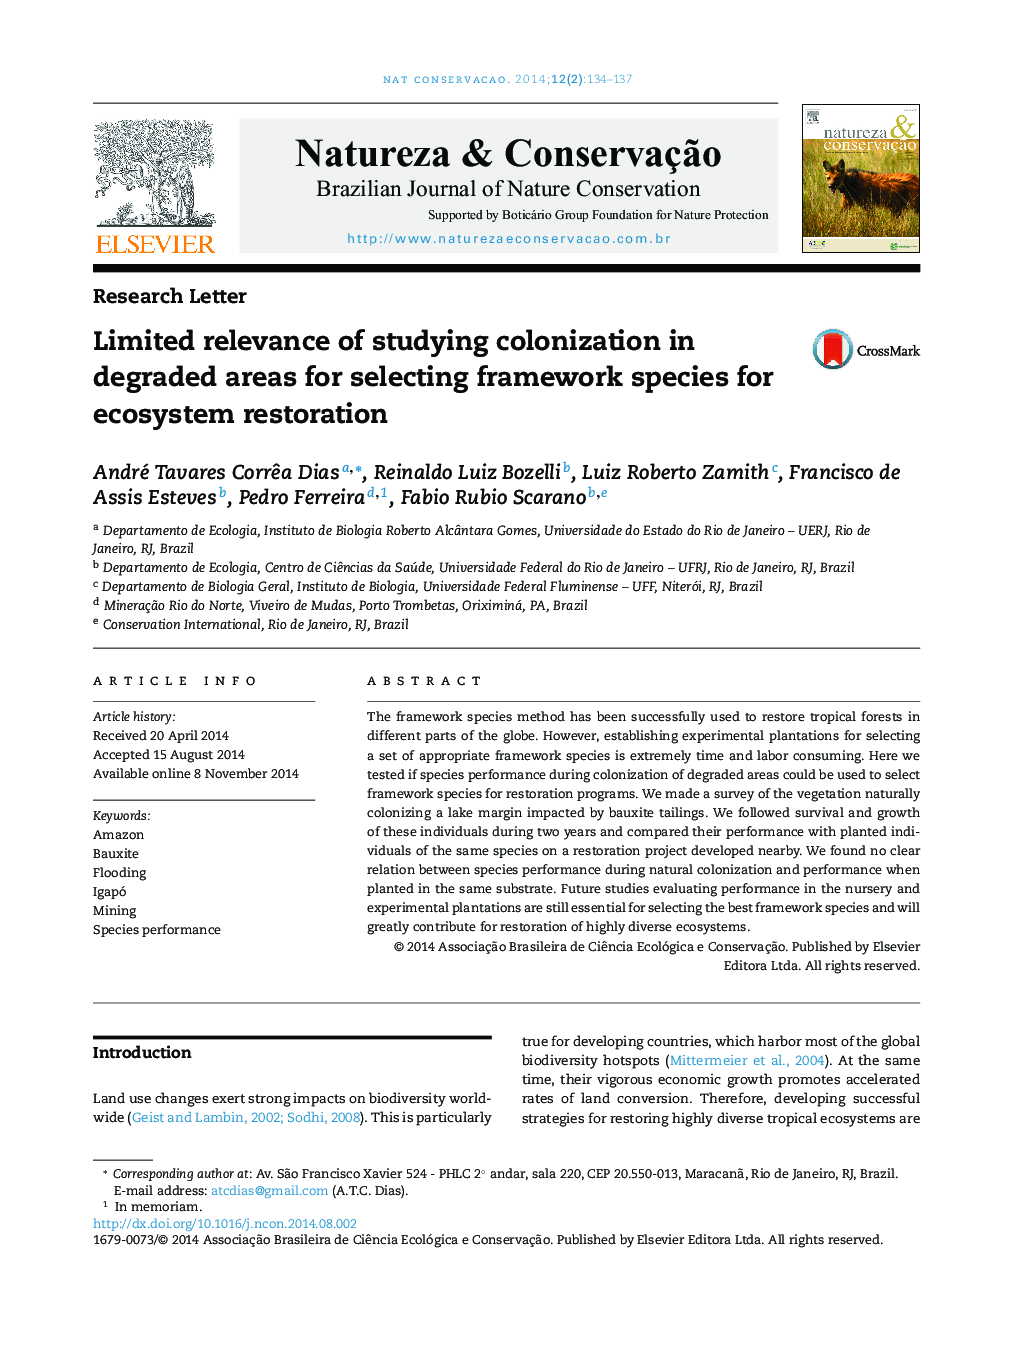 Limited relevance of studying colonization in degraded areas for selecting framework species for ecosystem restoration